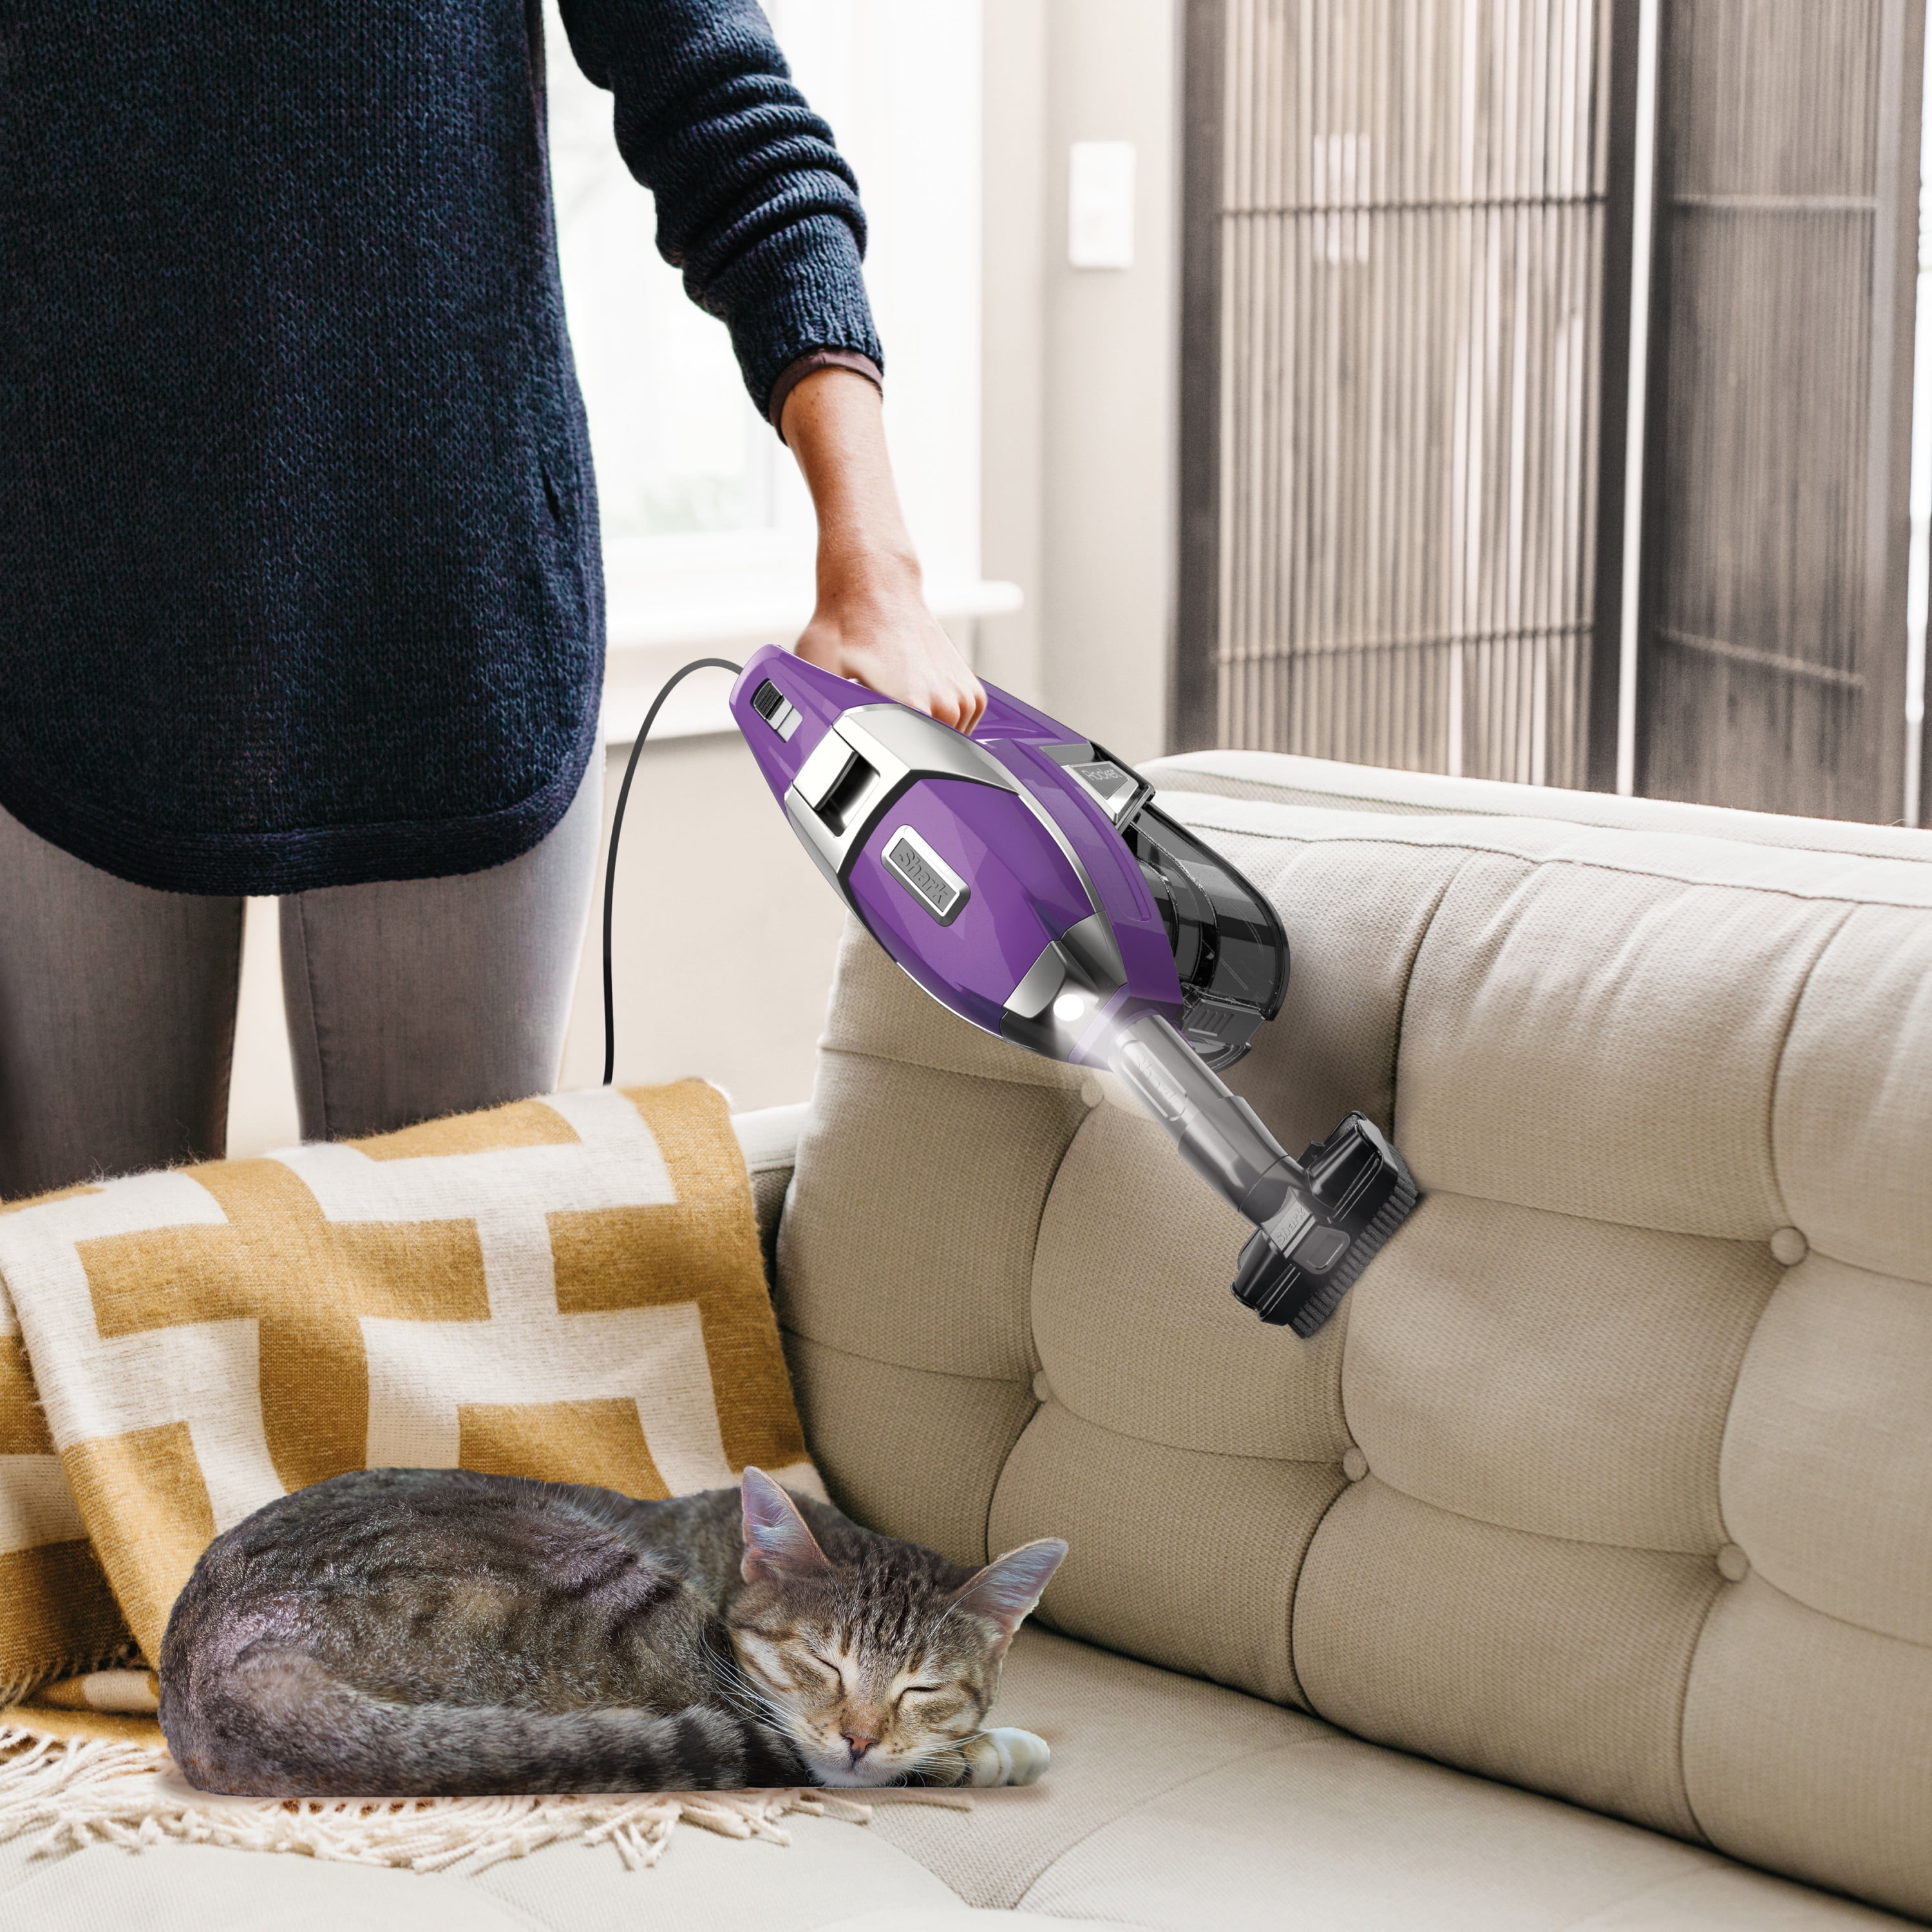 Shark Rocket Pet Pro Corded Stick Vacuum with Self-Cleaning Brush roll - 1